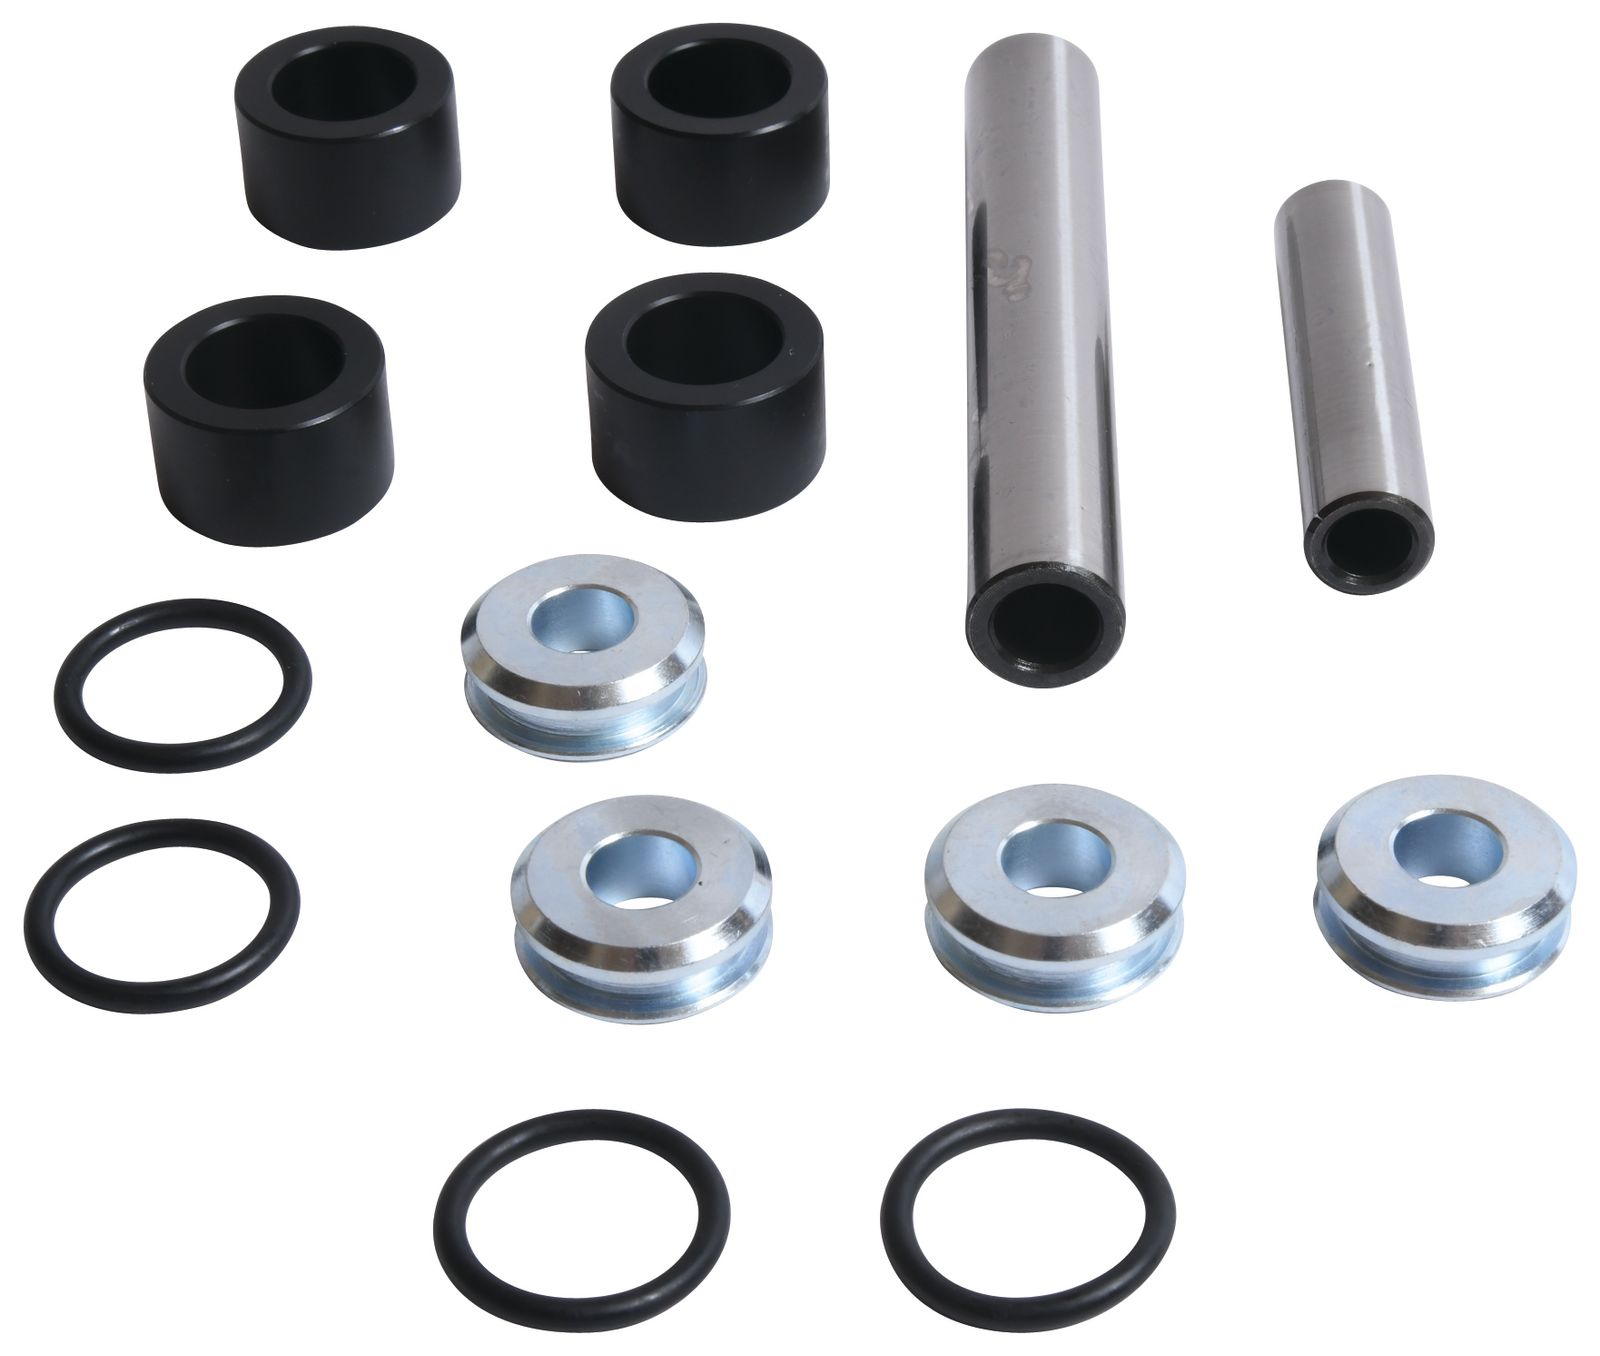 Wrp Rear Ind. Suspension Kits - WRP501243 image